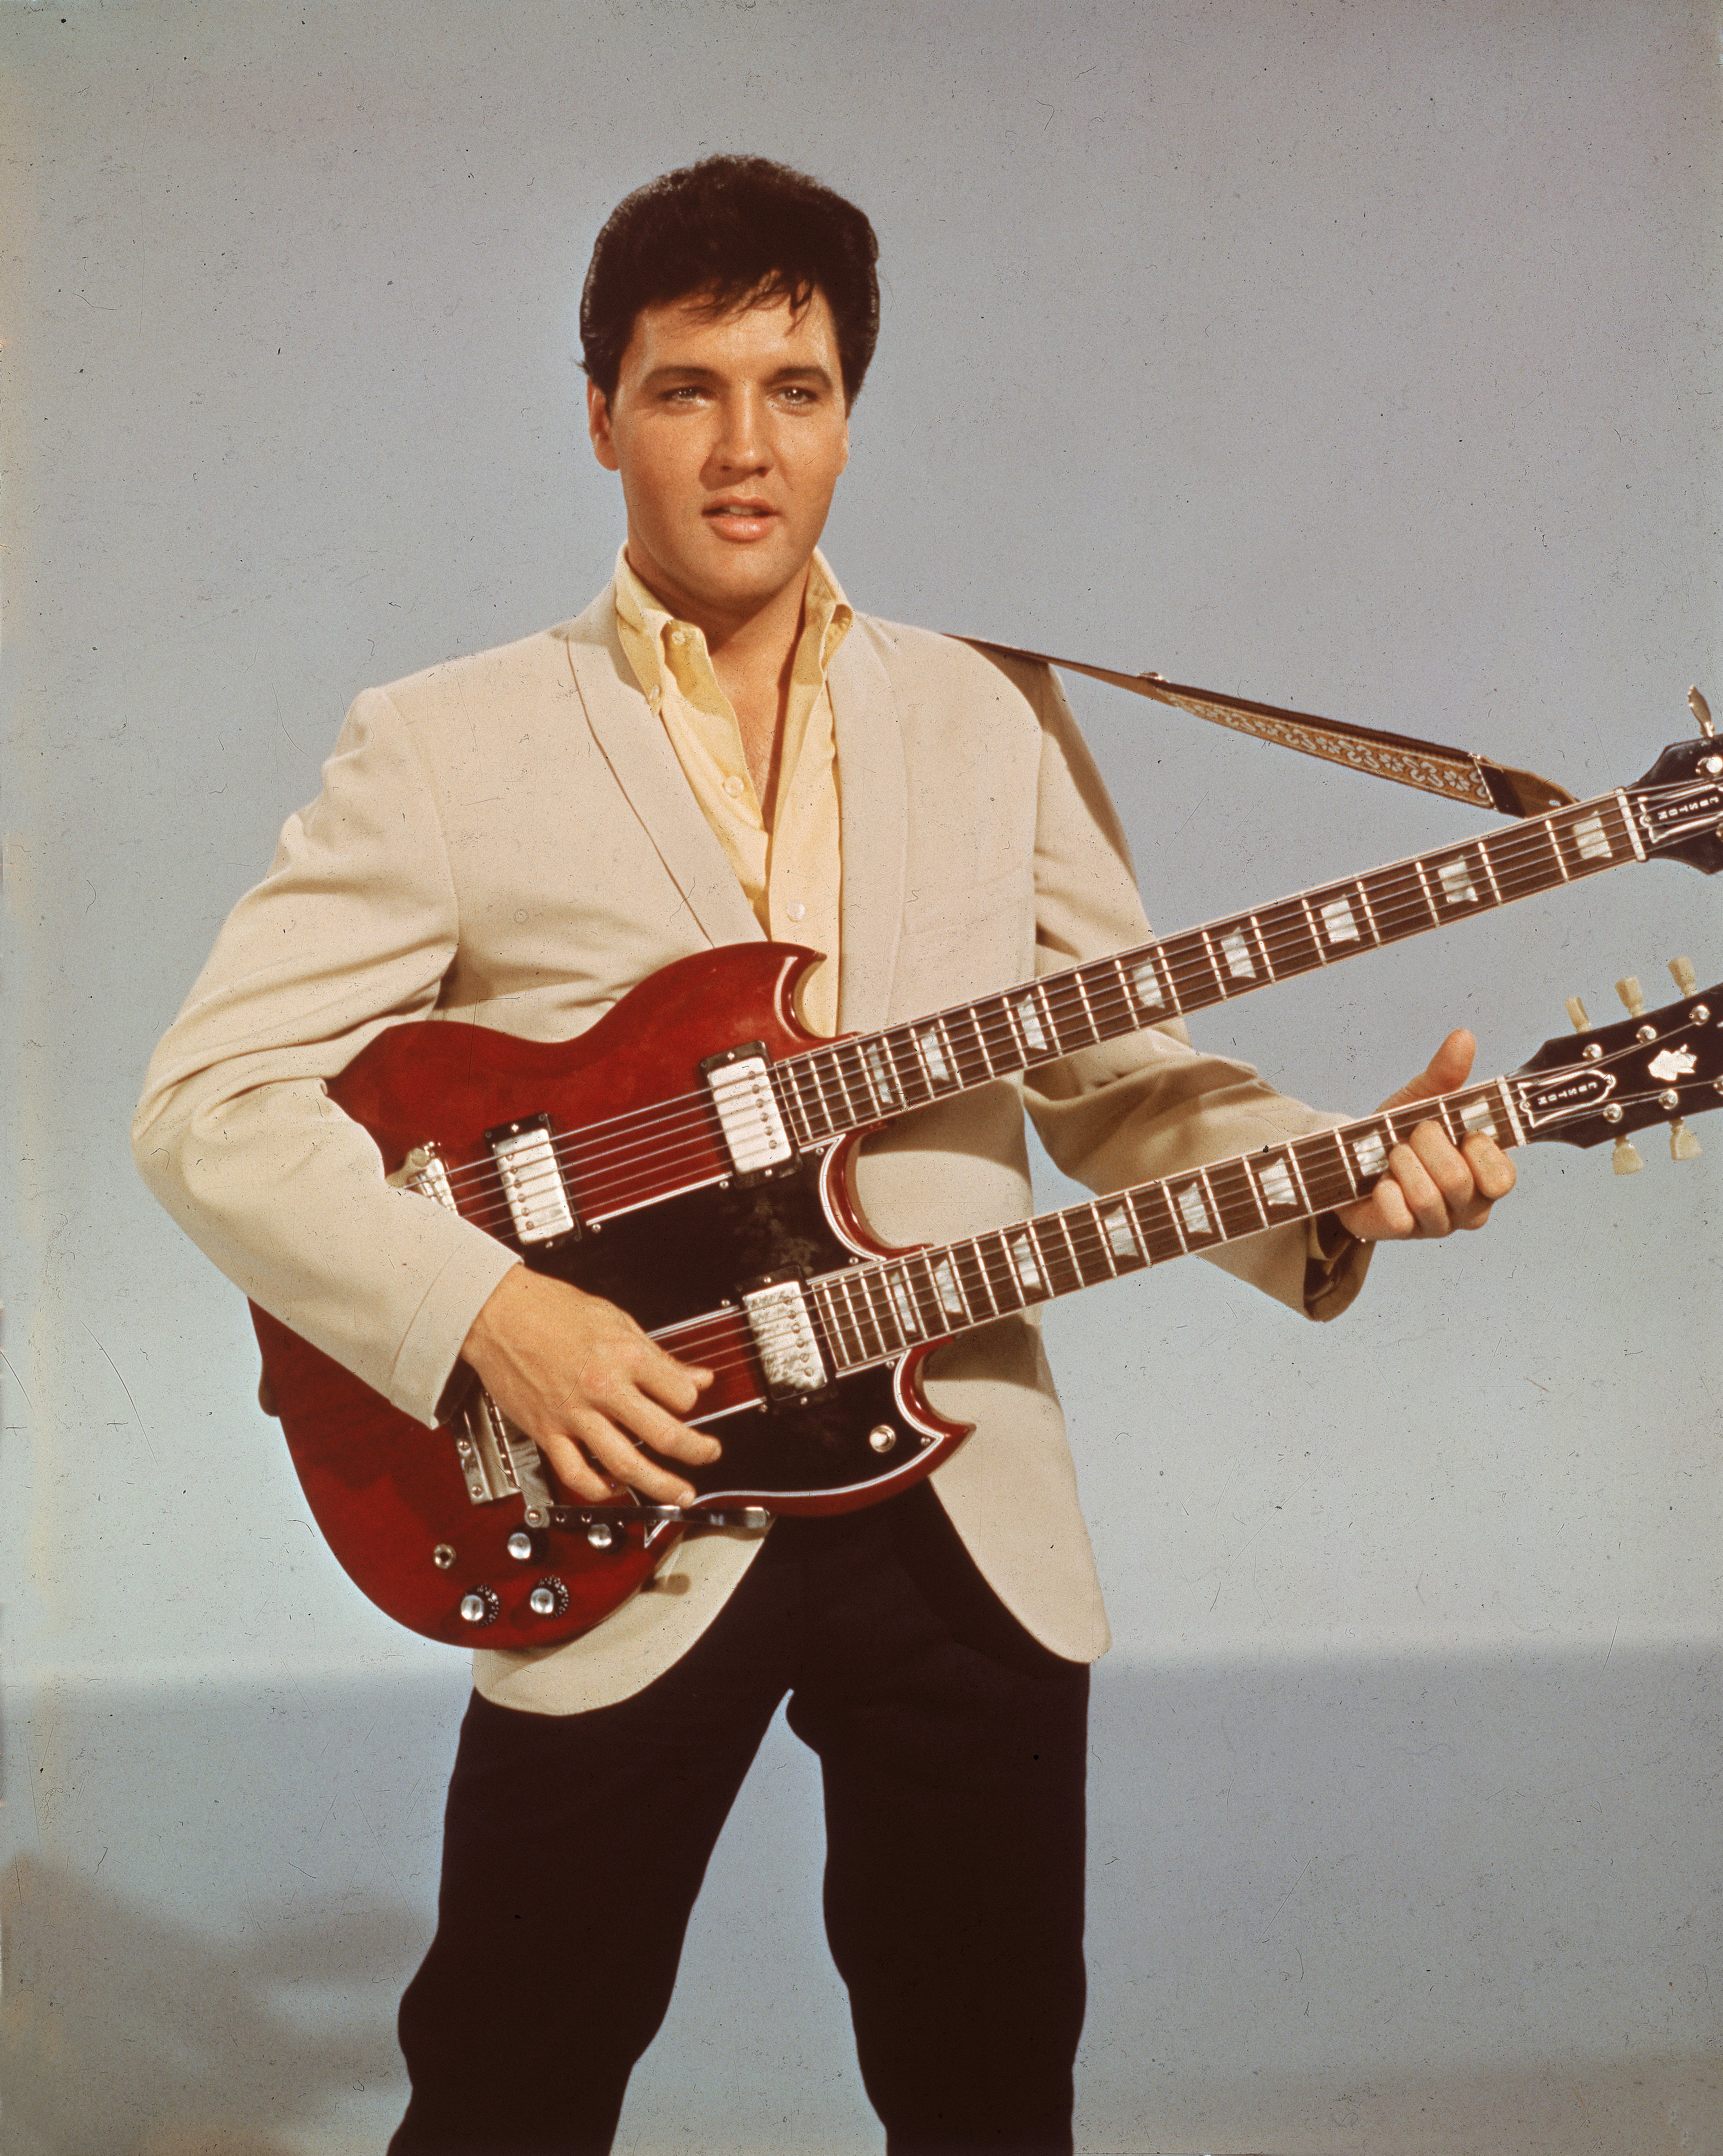 Elvis Presley pictured performing in 1966. Presley gave the blue suede shoes to his close friend after an all-night party at his Graceland mansion